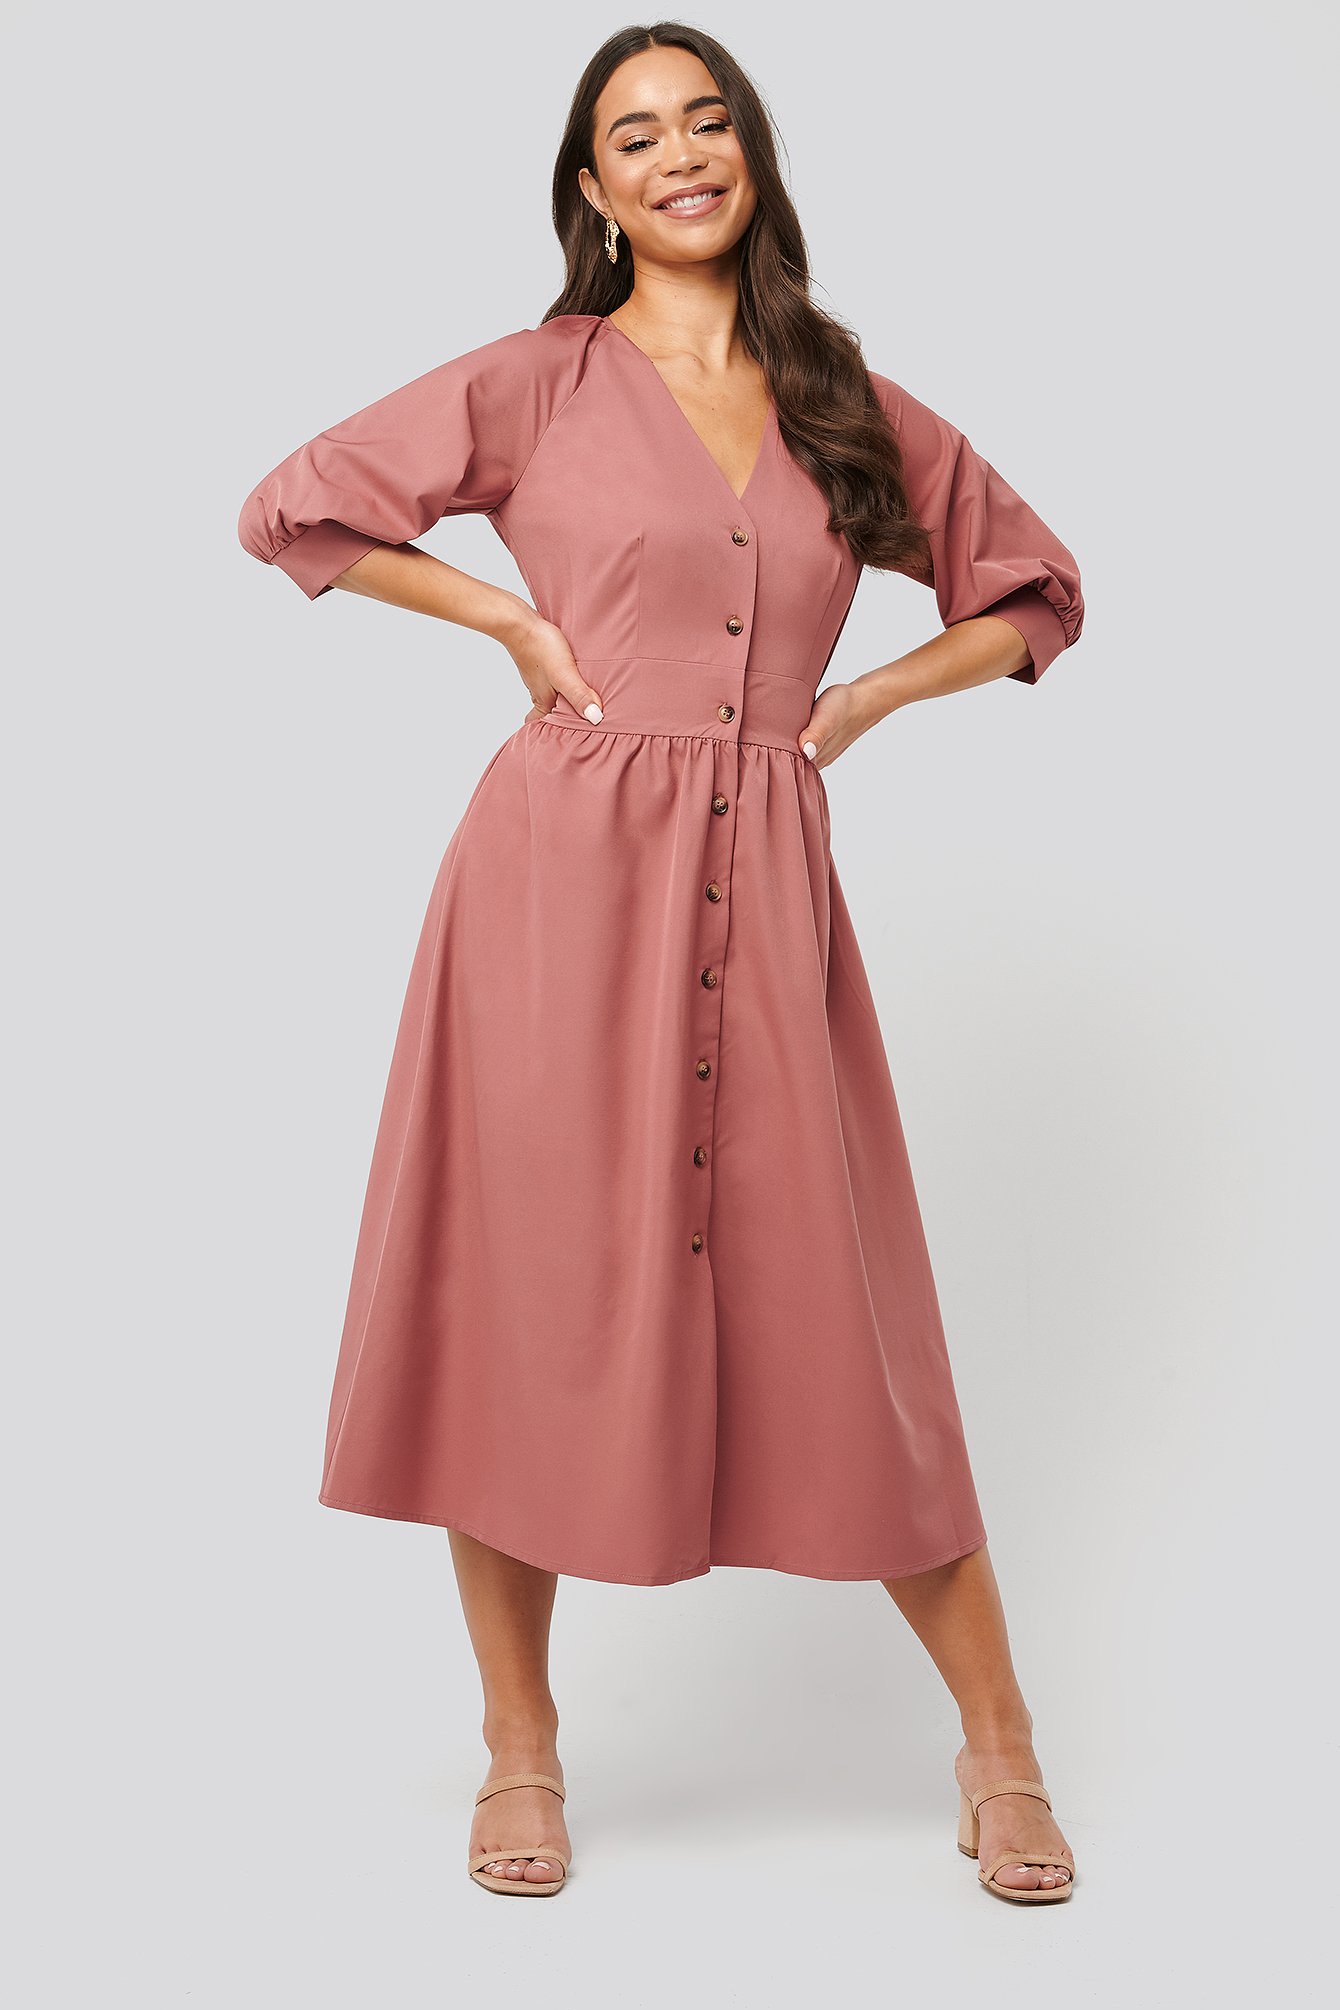 Belted Balloon Sleeve Dress Outfit